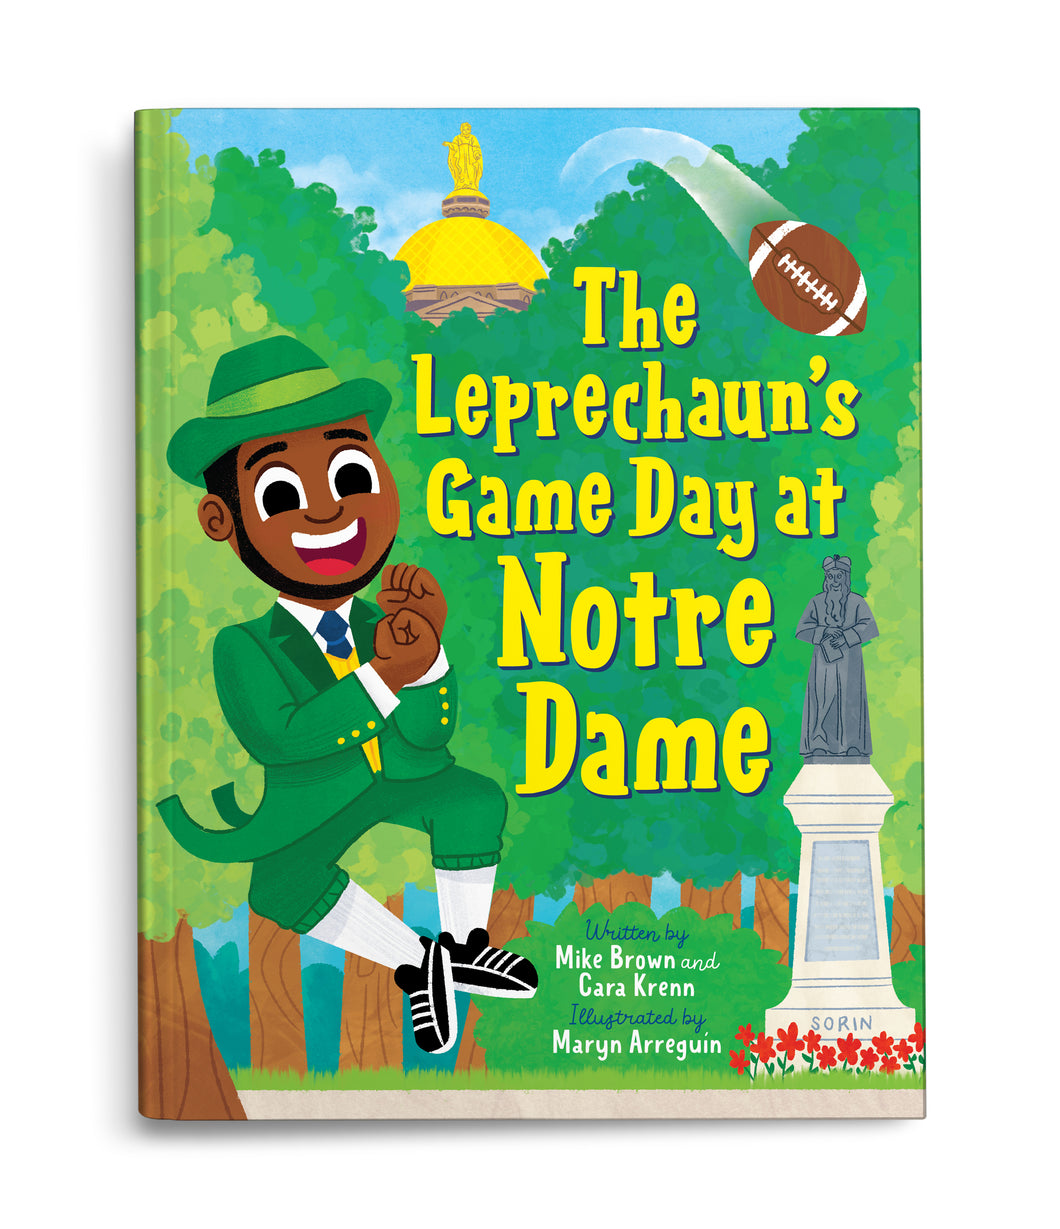 The Leprechaun’s Game Day at Notre Dame